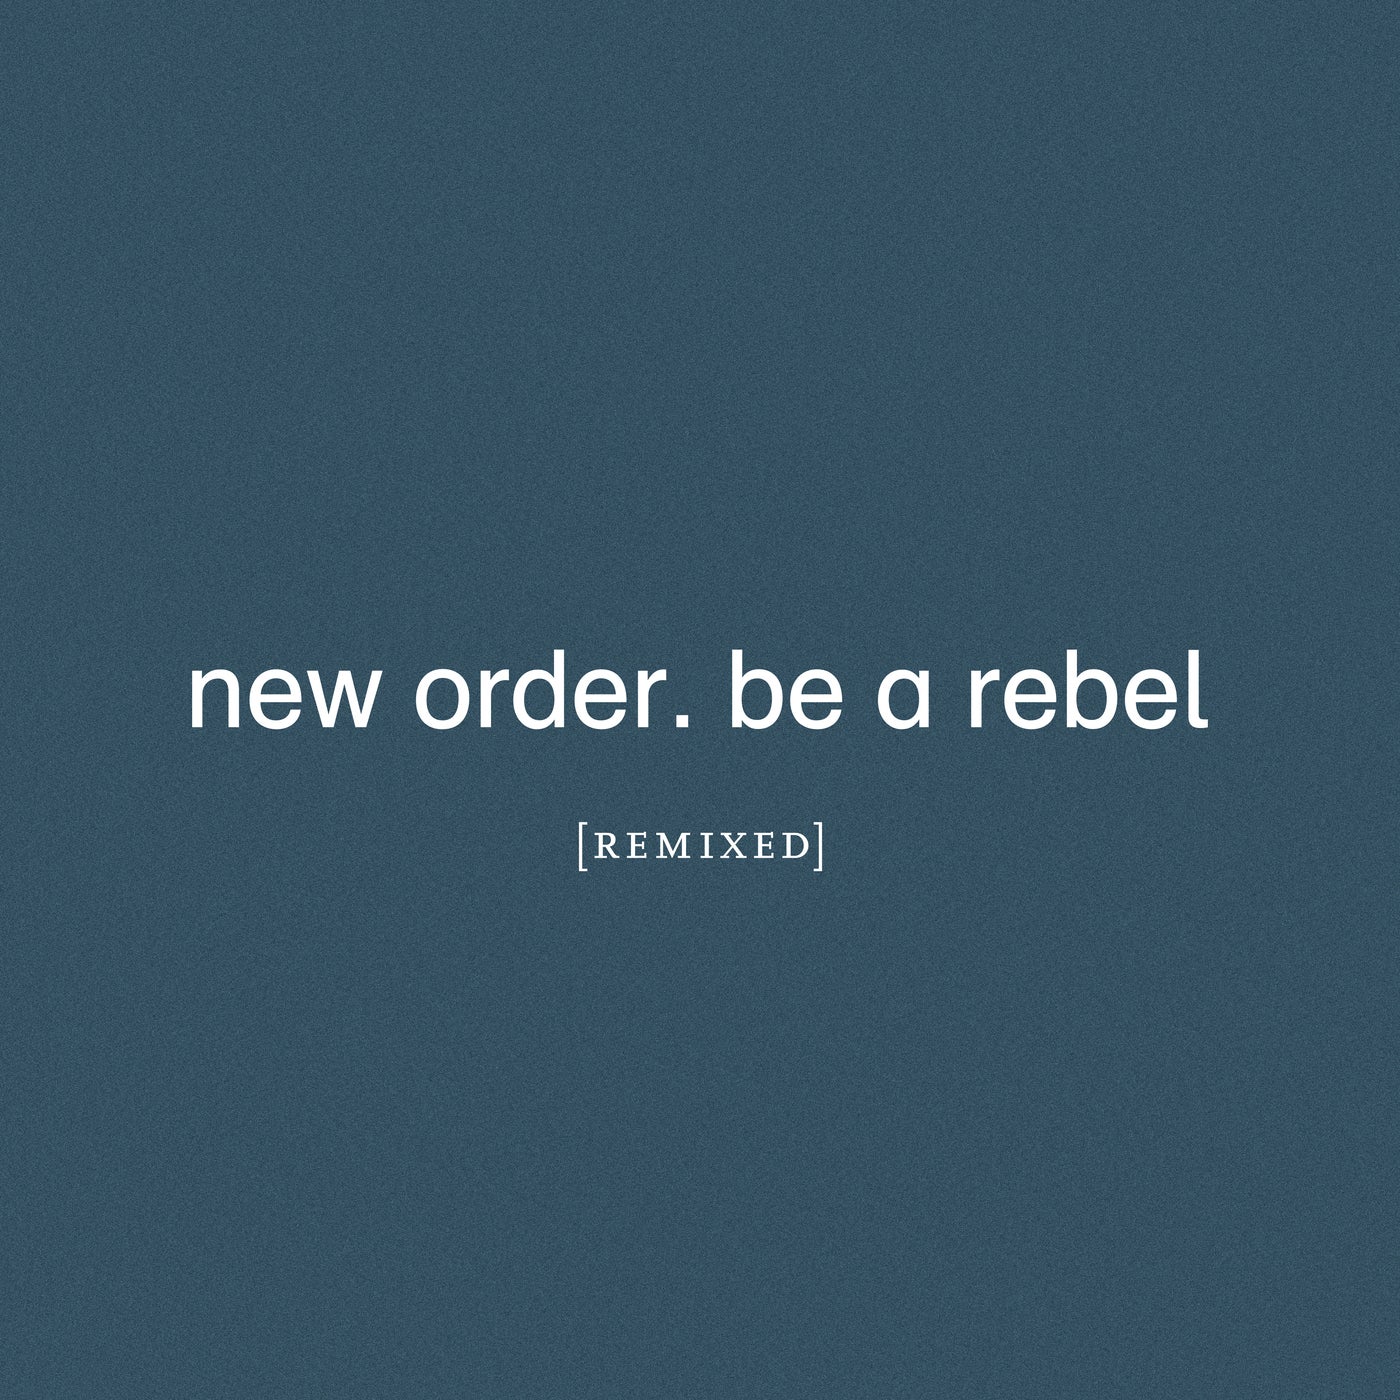 Download New Order - Be a Rebel Remixed on Electrobuzz